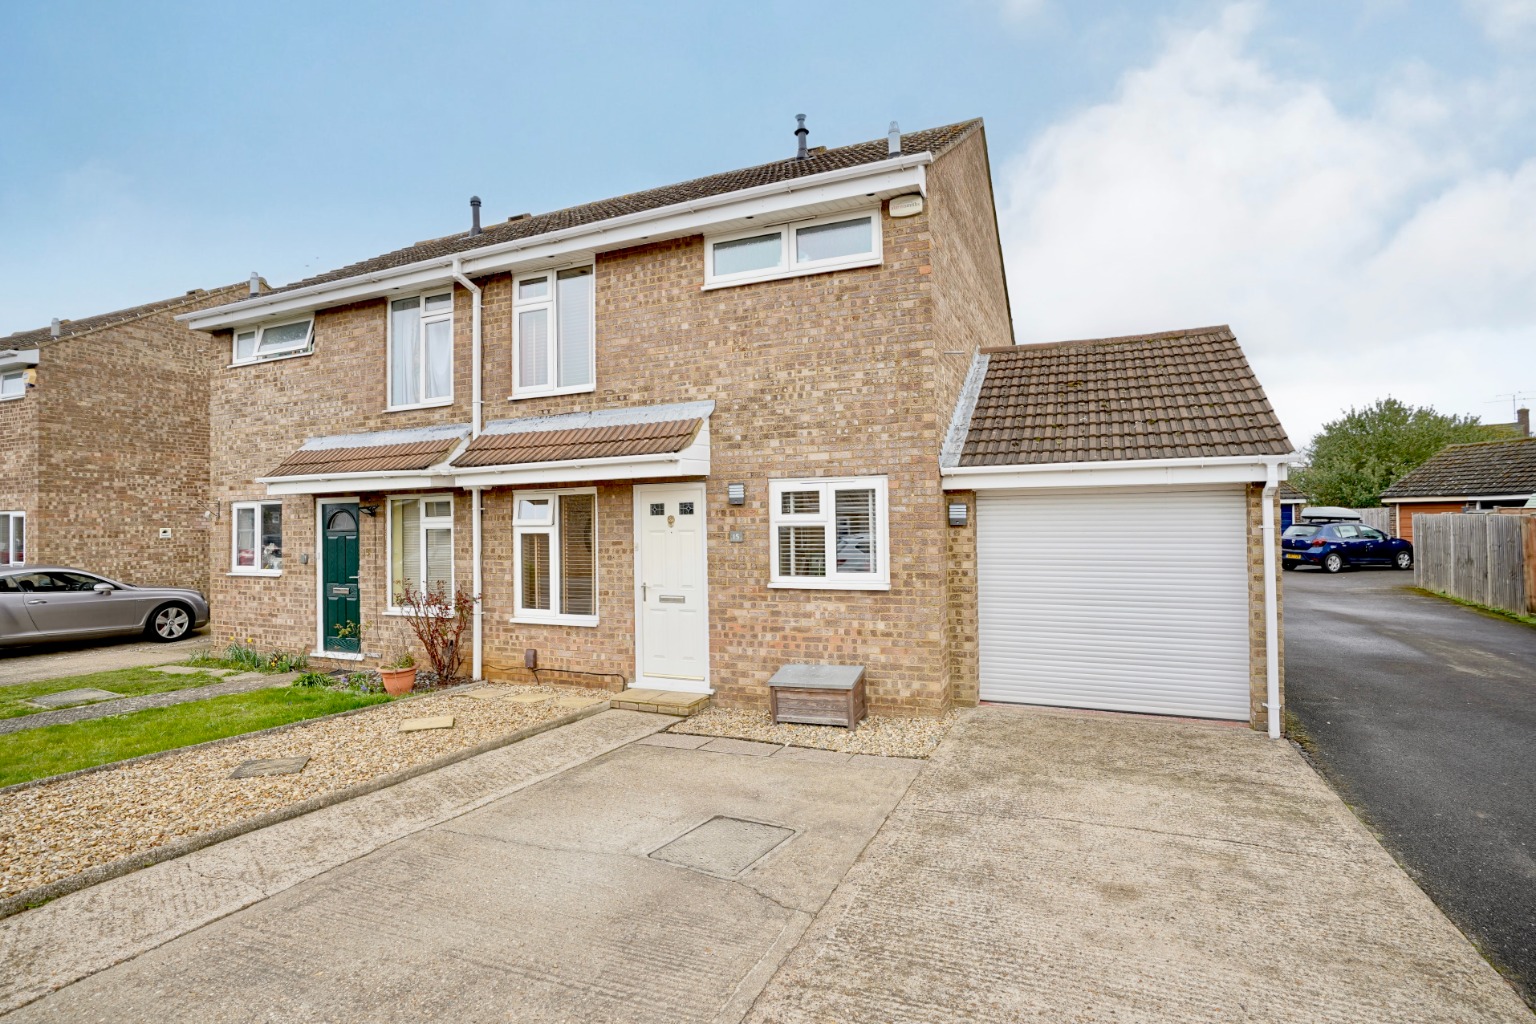 Immaculately presented by the current owners, this three bedroom semi-detached home benefits from an extension and conservatory, giving plenty of ground floor living space for a family.